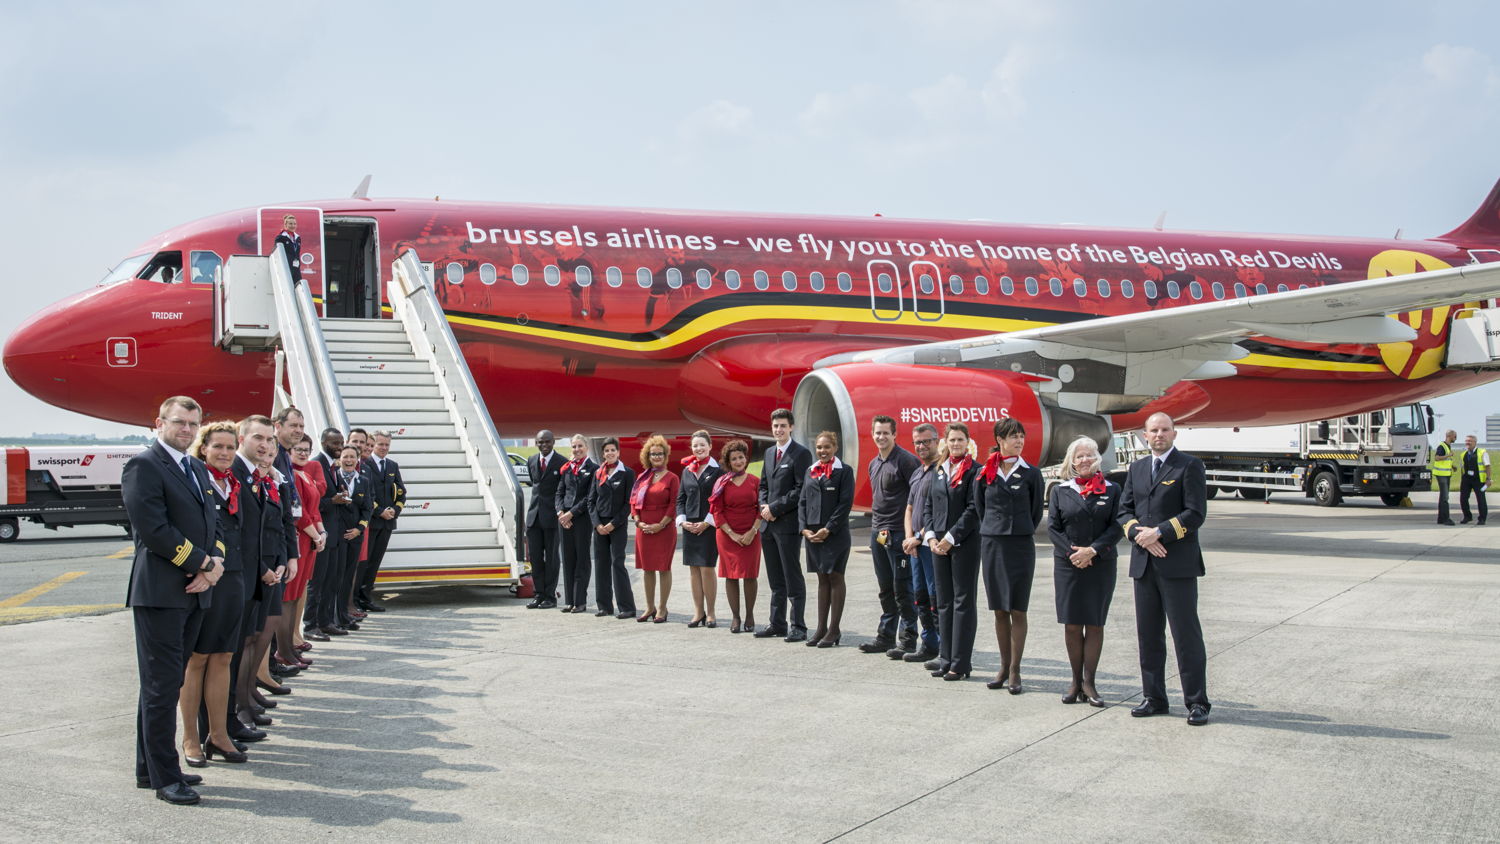 Departure of the Belgian Red Devils to France for the European Championship 2016